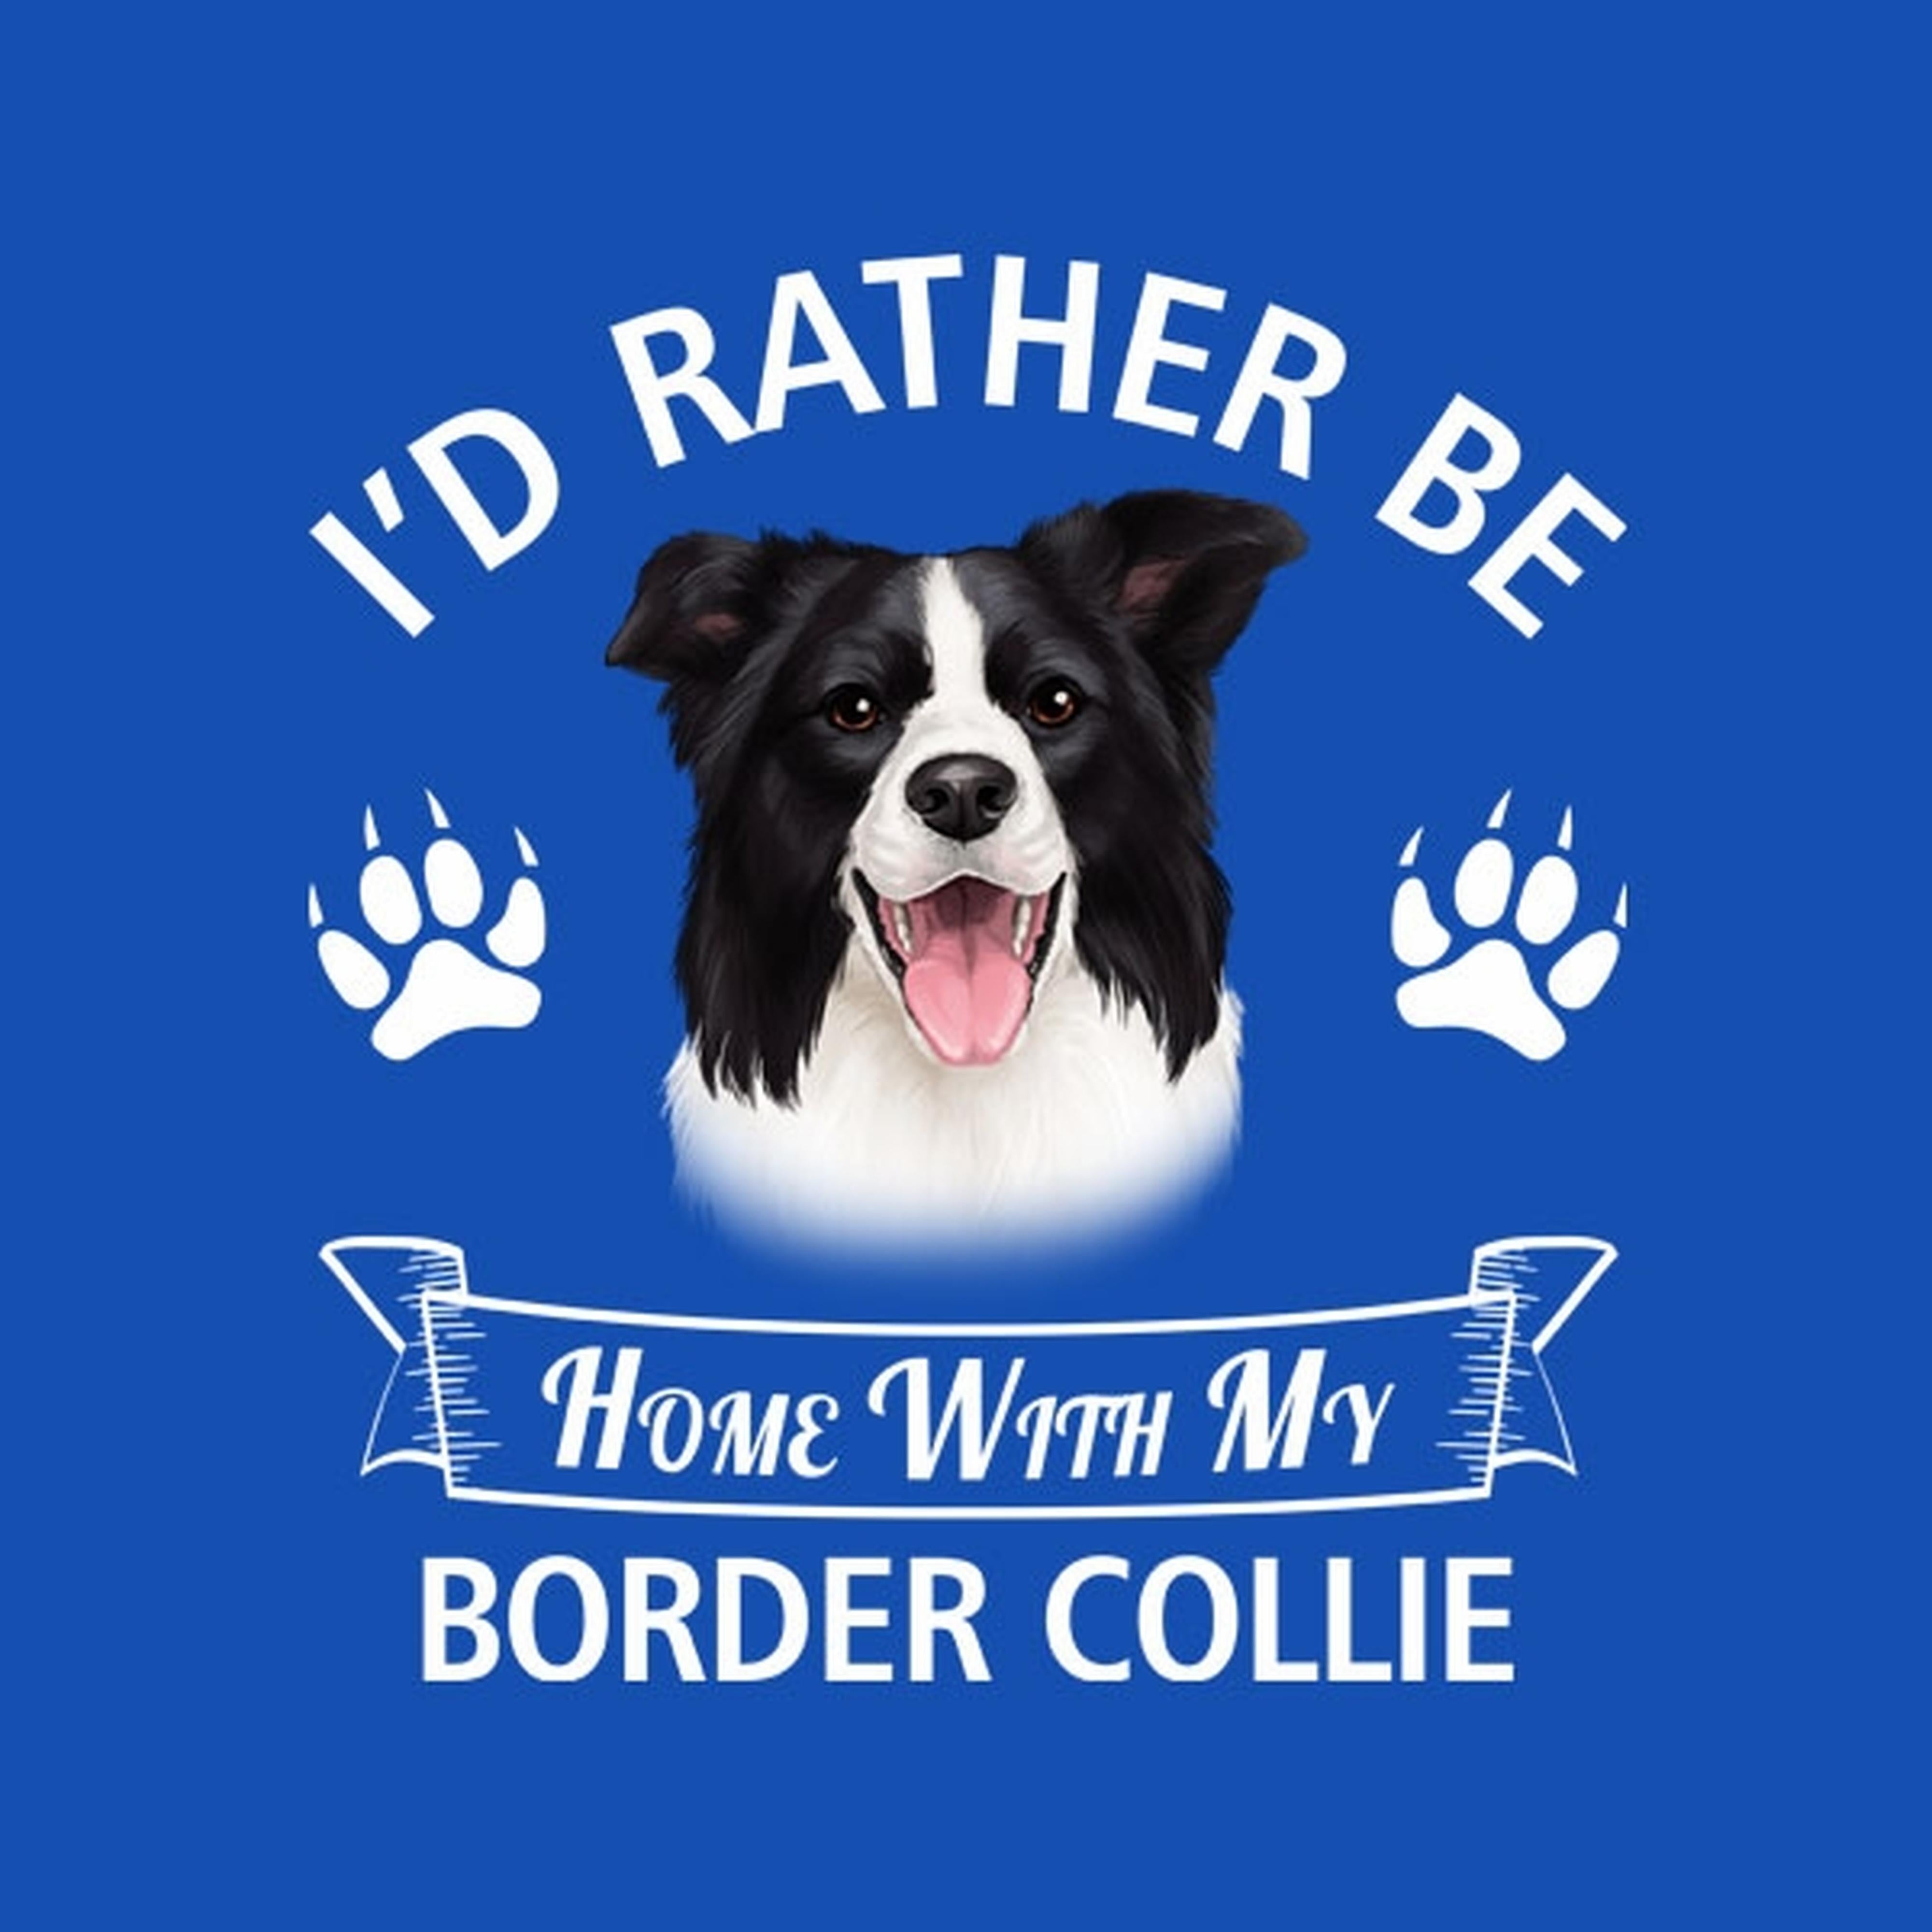 I'd rather stay home with my Border Collie - T-shirt